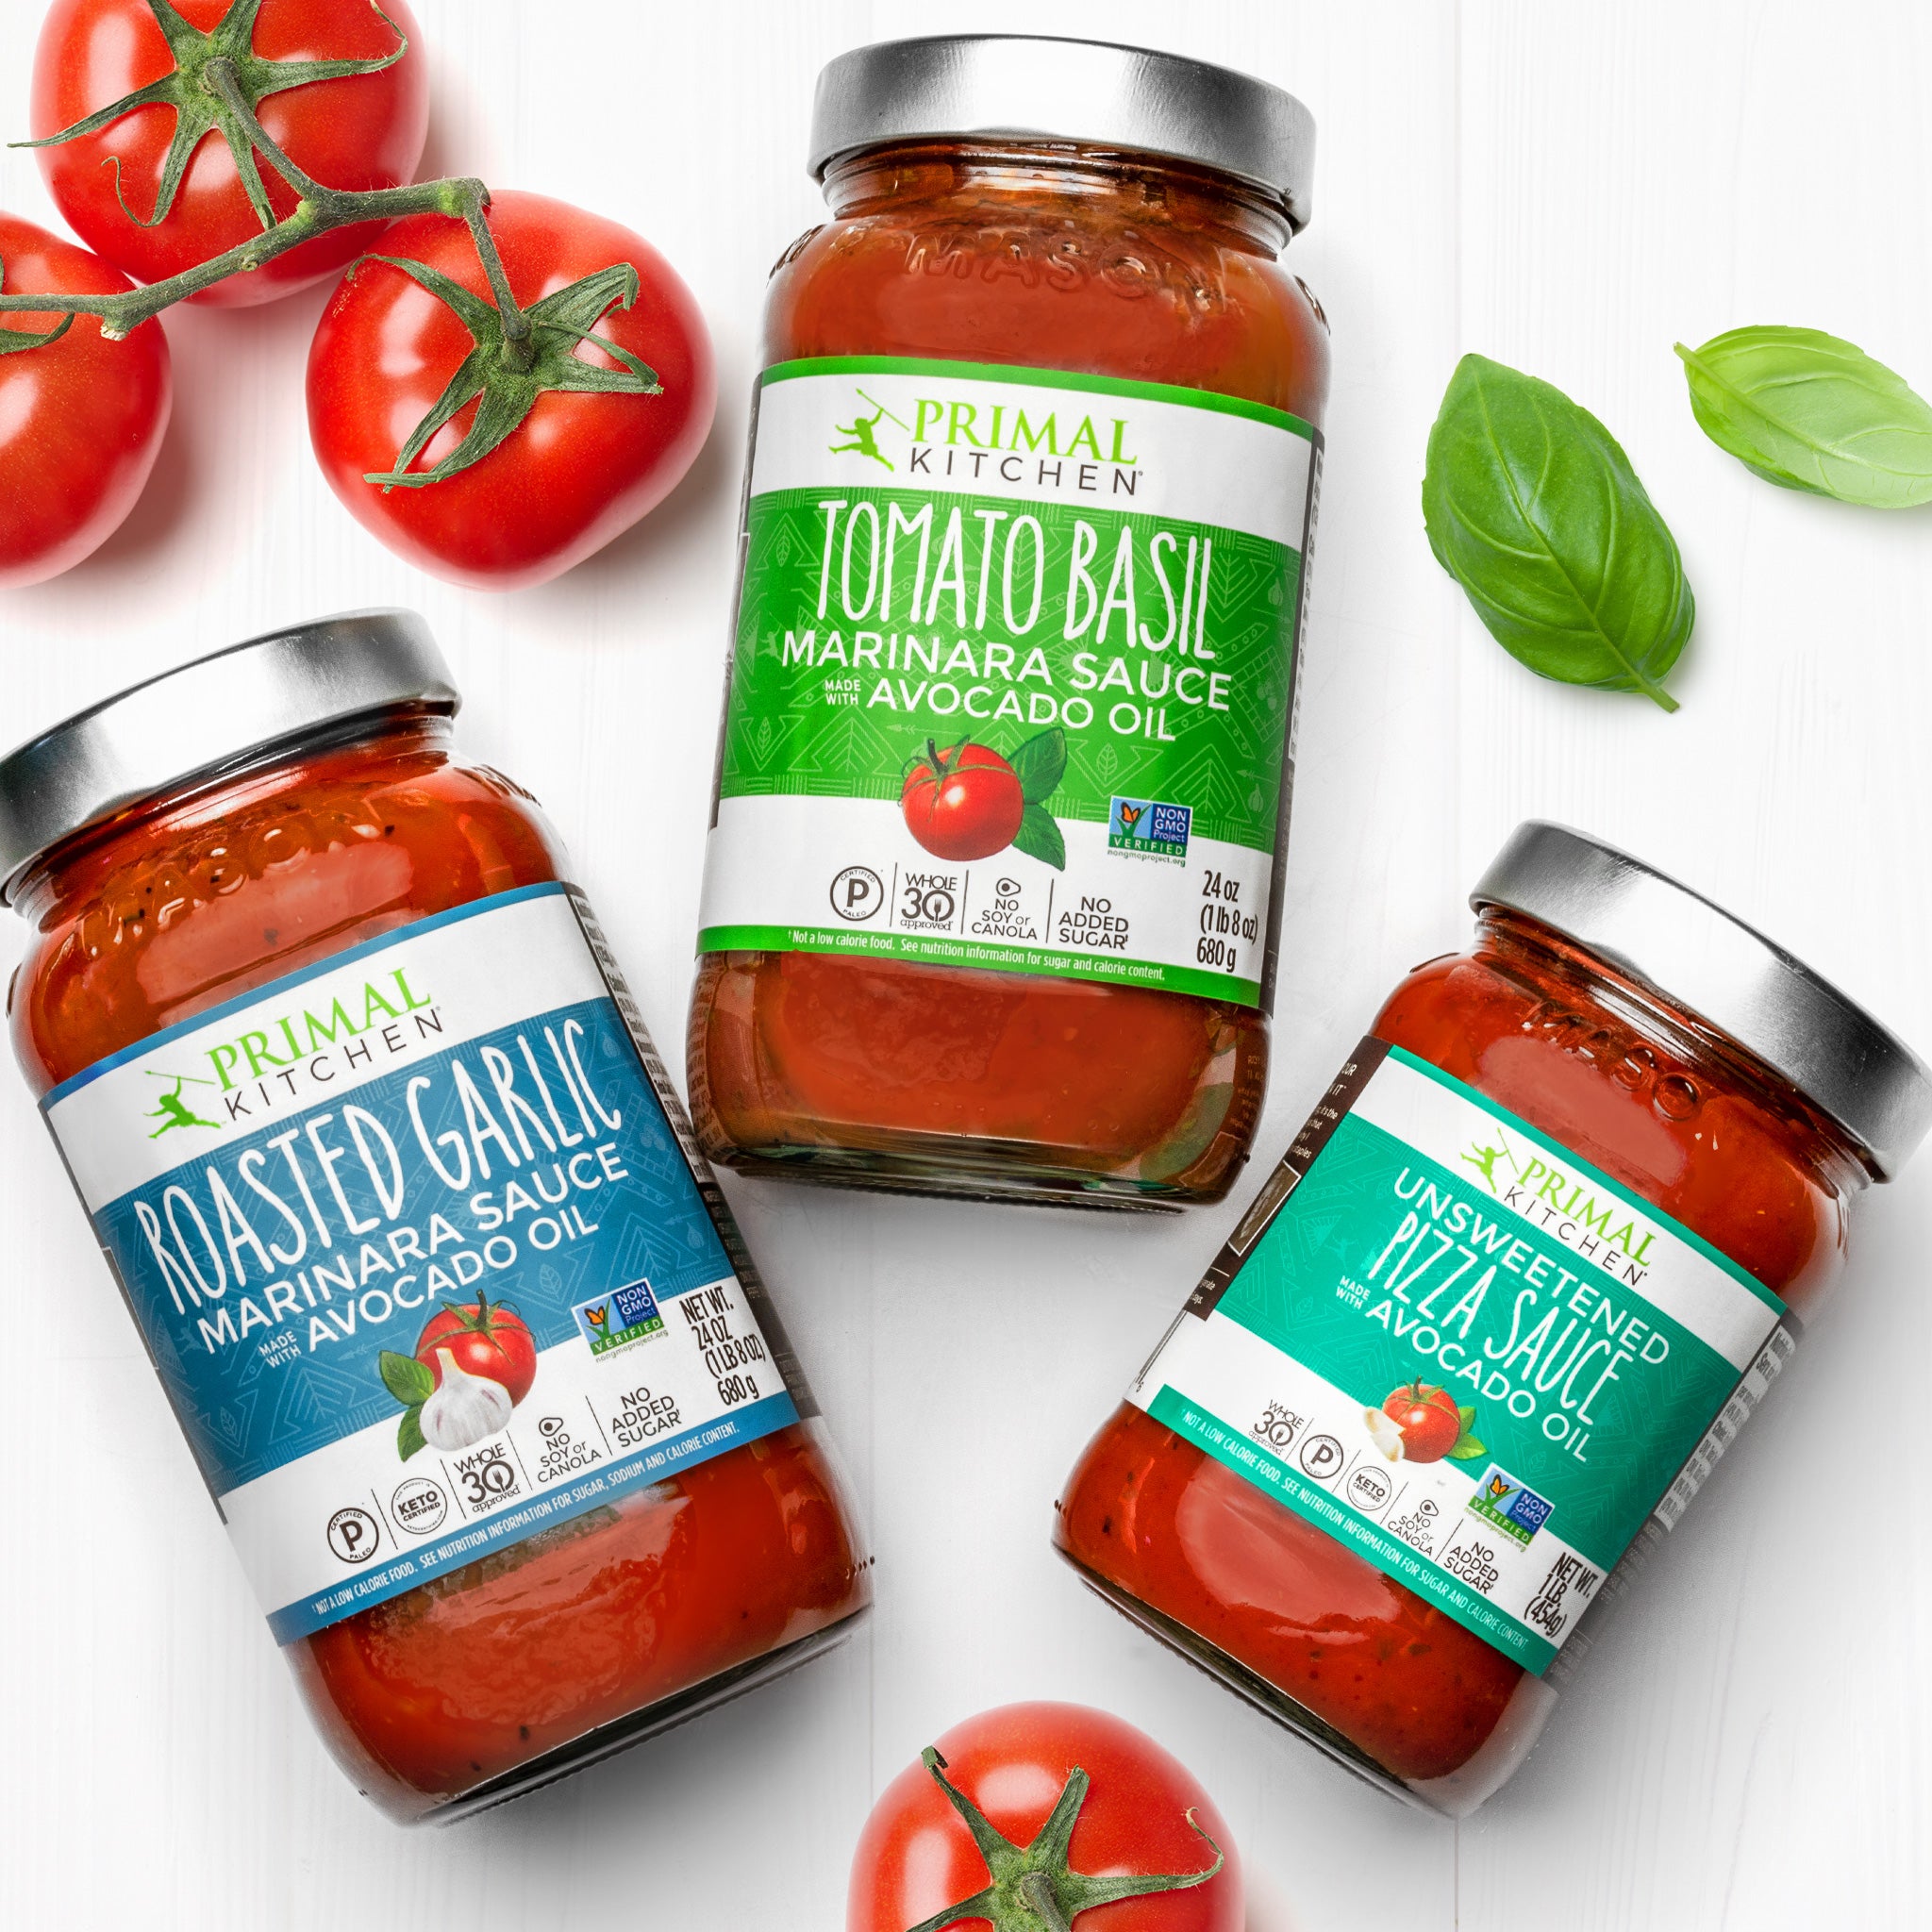 Jars of Primal Kitchen Roasted Garlic Marinara Tomato Sauce, Primal Kitchen Tomato Basil Marinara Pasta Sauce, and Primal Kitchen Unsweetened Red Pizza Sauce Made with Avocado Oil on a light grey background.